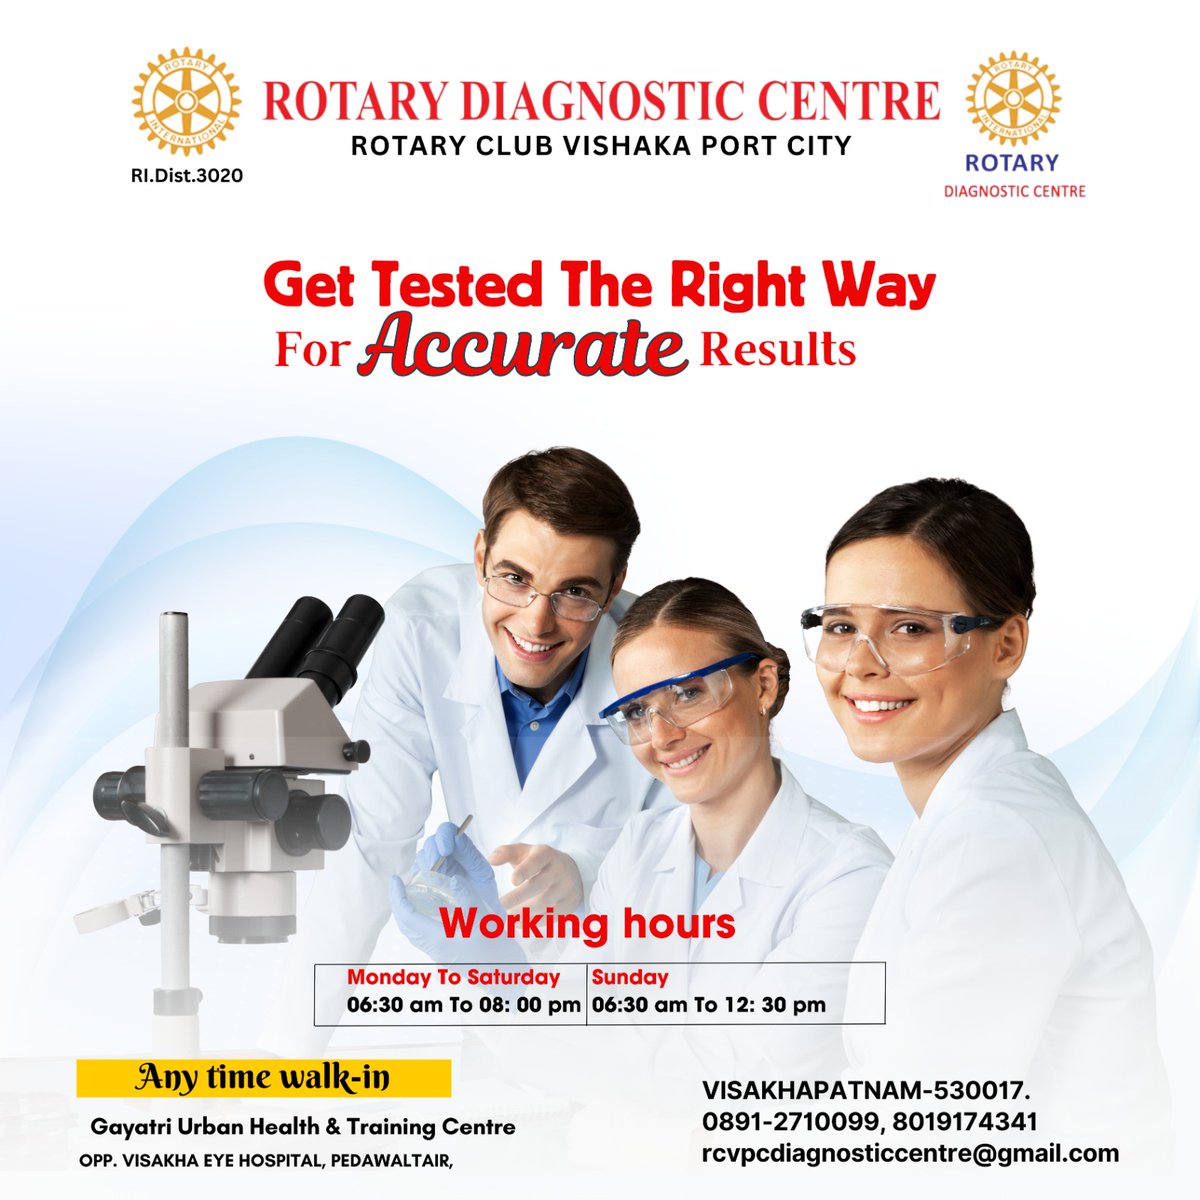 Get tested the right way for precise results at Rotary Diagnostic Centre. Your health is our priority!
🕒 Working Hours:
•Monday to Saturday: 06:30 am to 08:00 pm
•Sunday: 06:30 am to 12:30 pm
🚶‍♂️ Anytime Walk-in
#RotaryDiagnosticCentre #DiagnosticCenter #HealthScreening